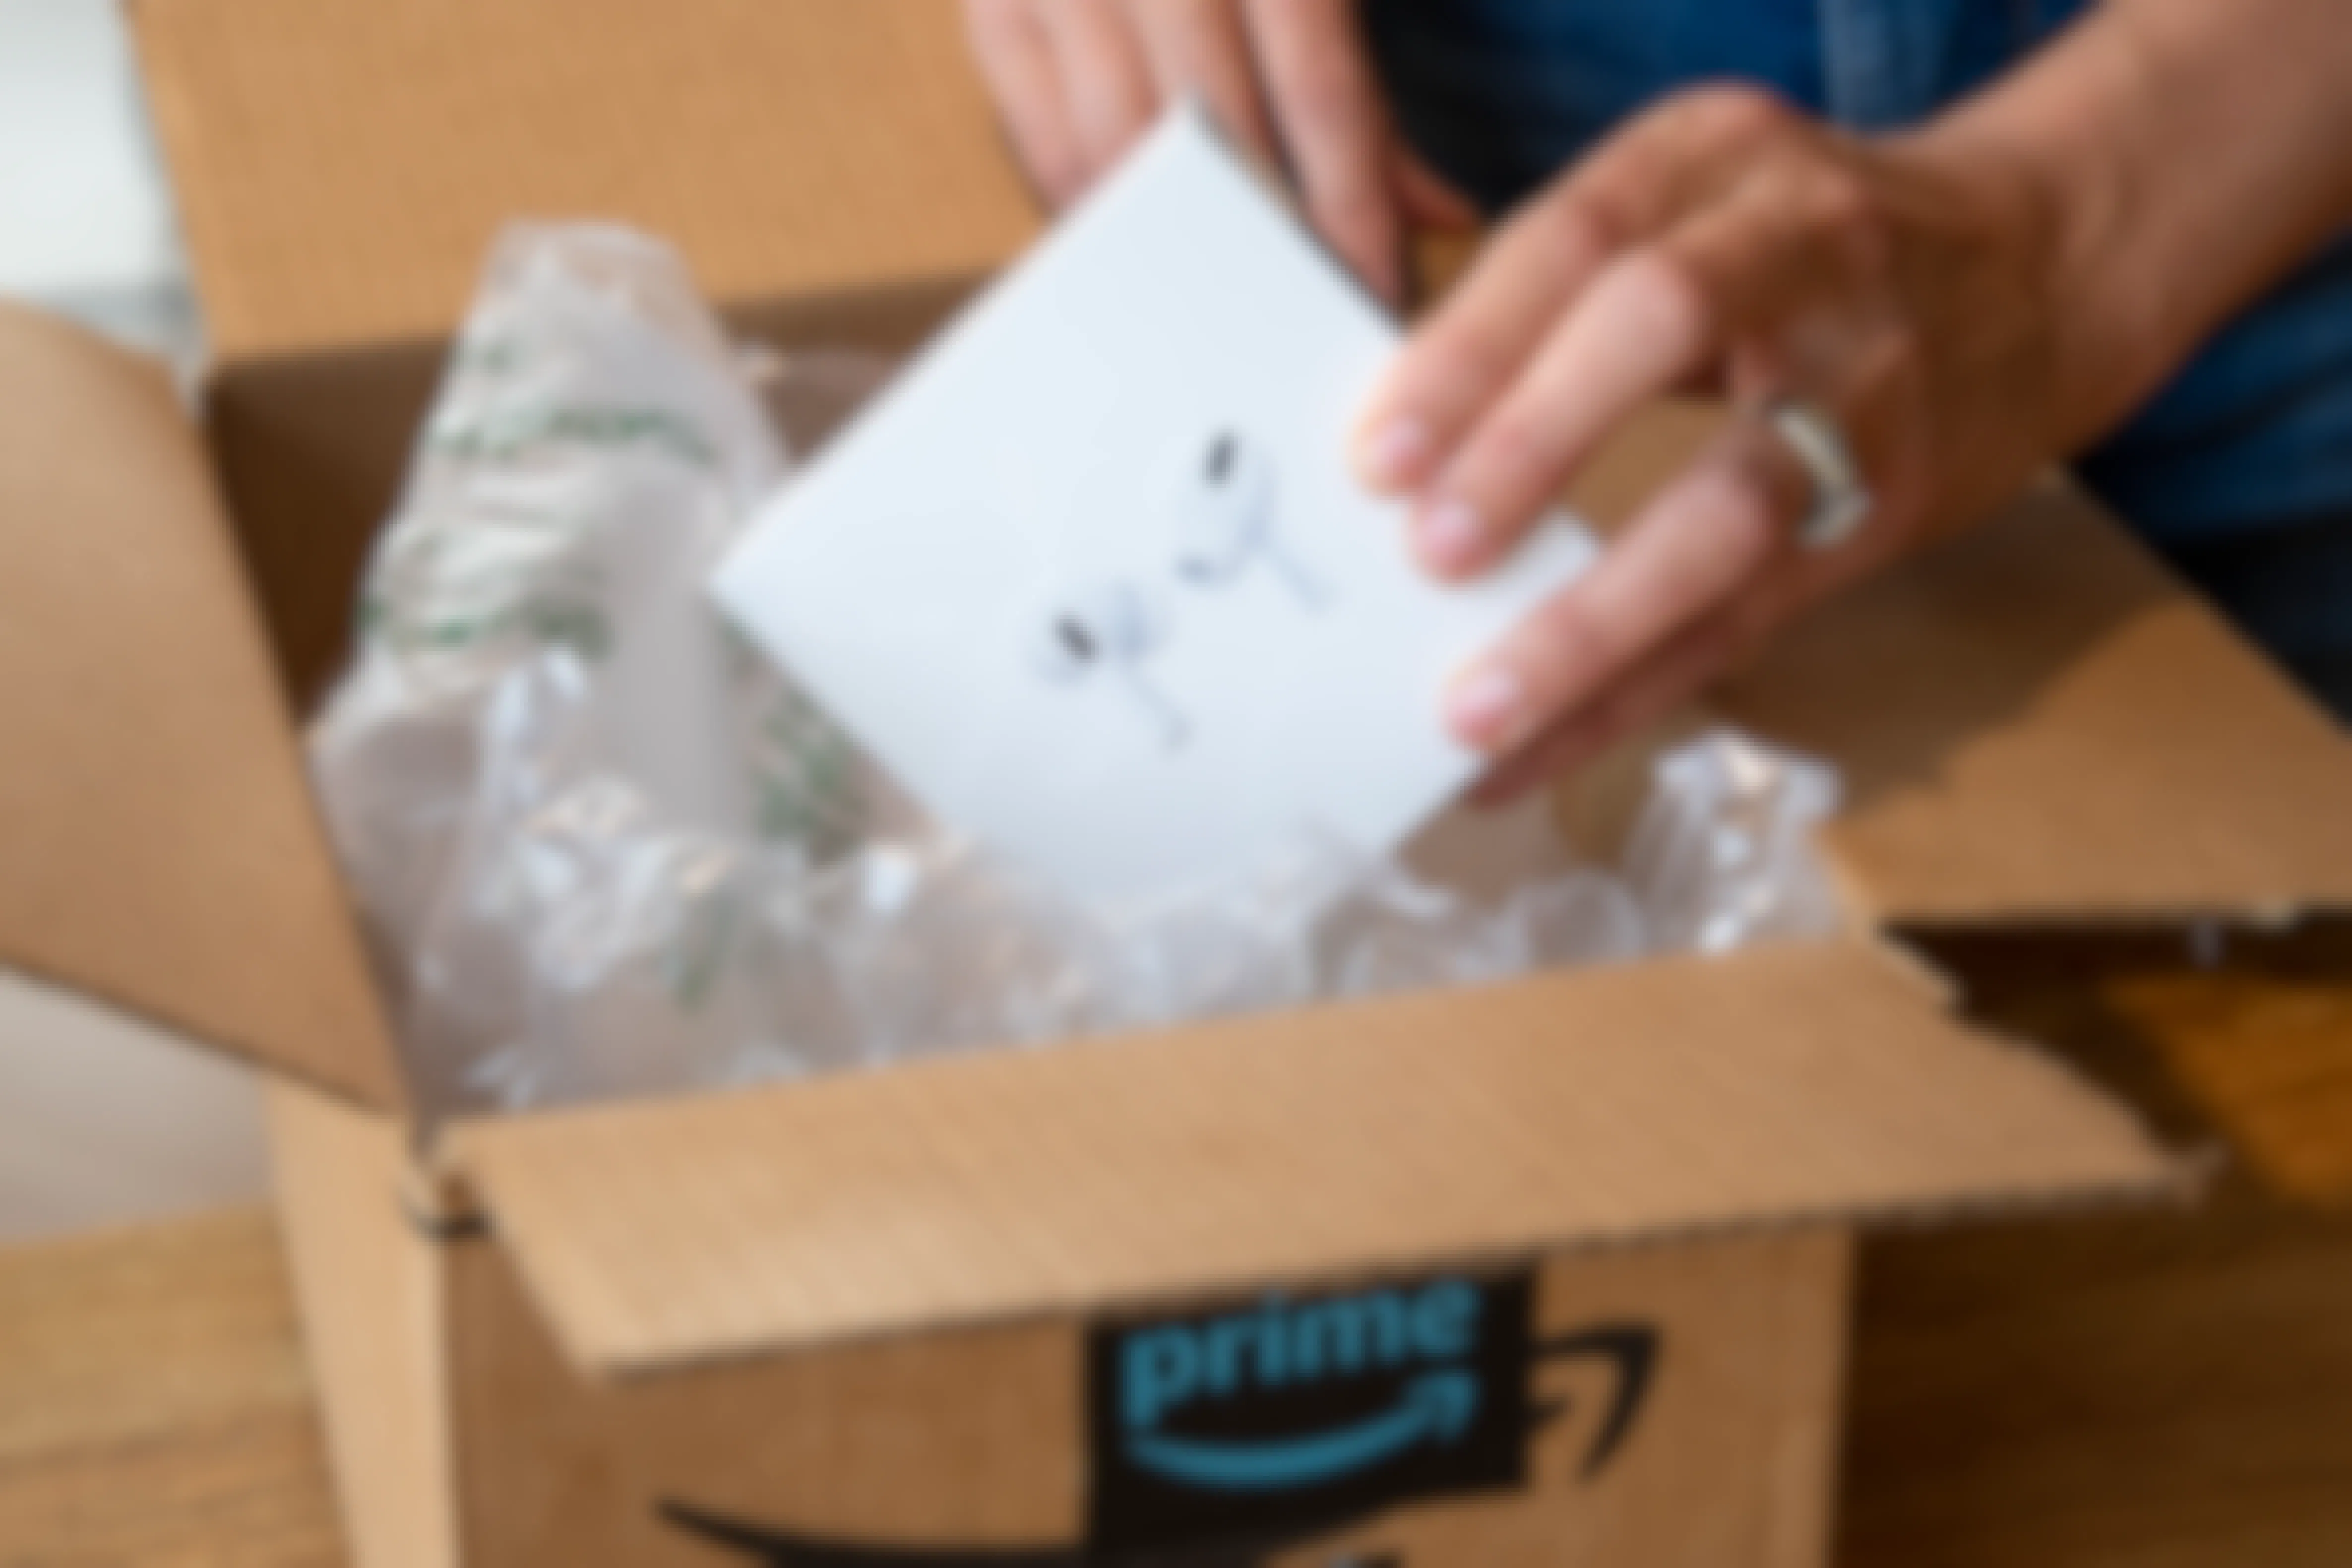 A person pulling a box of Apple Airpod pros out of an Amazon box.